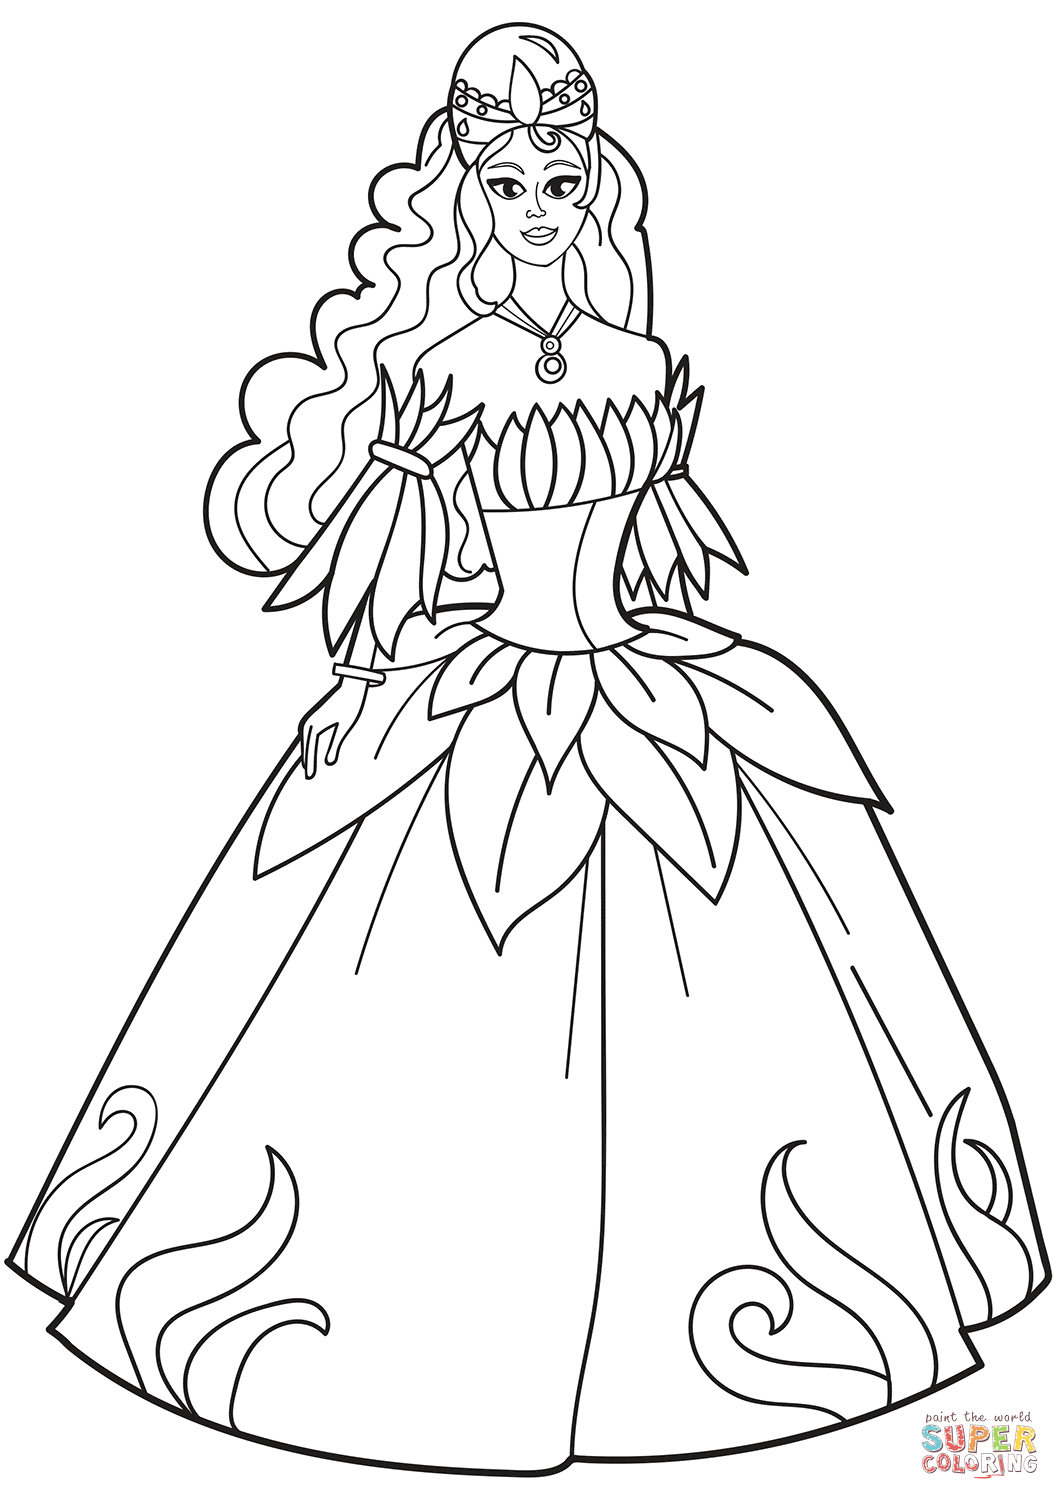 Princess in Flower Dress coloring page | Free Printable Coloring Pages